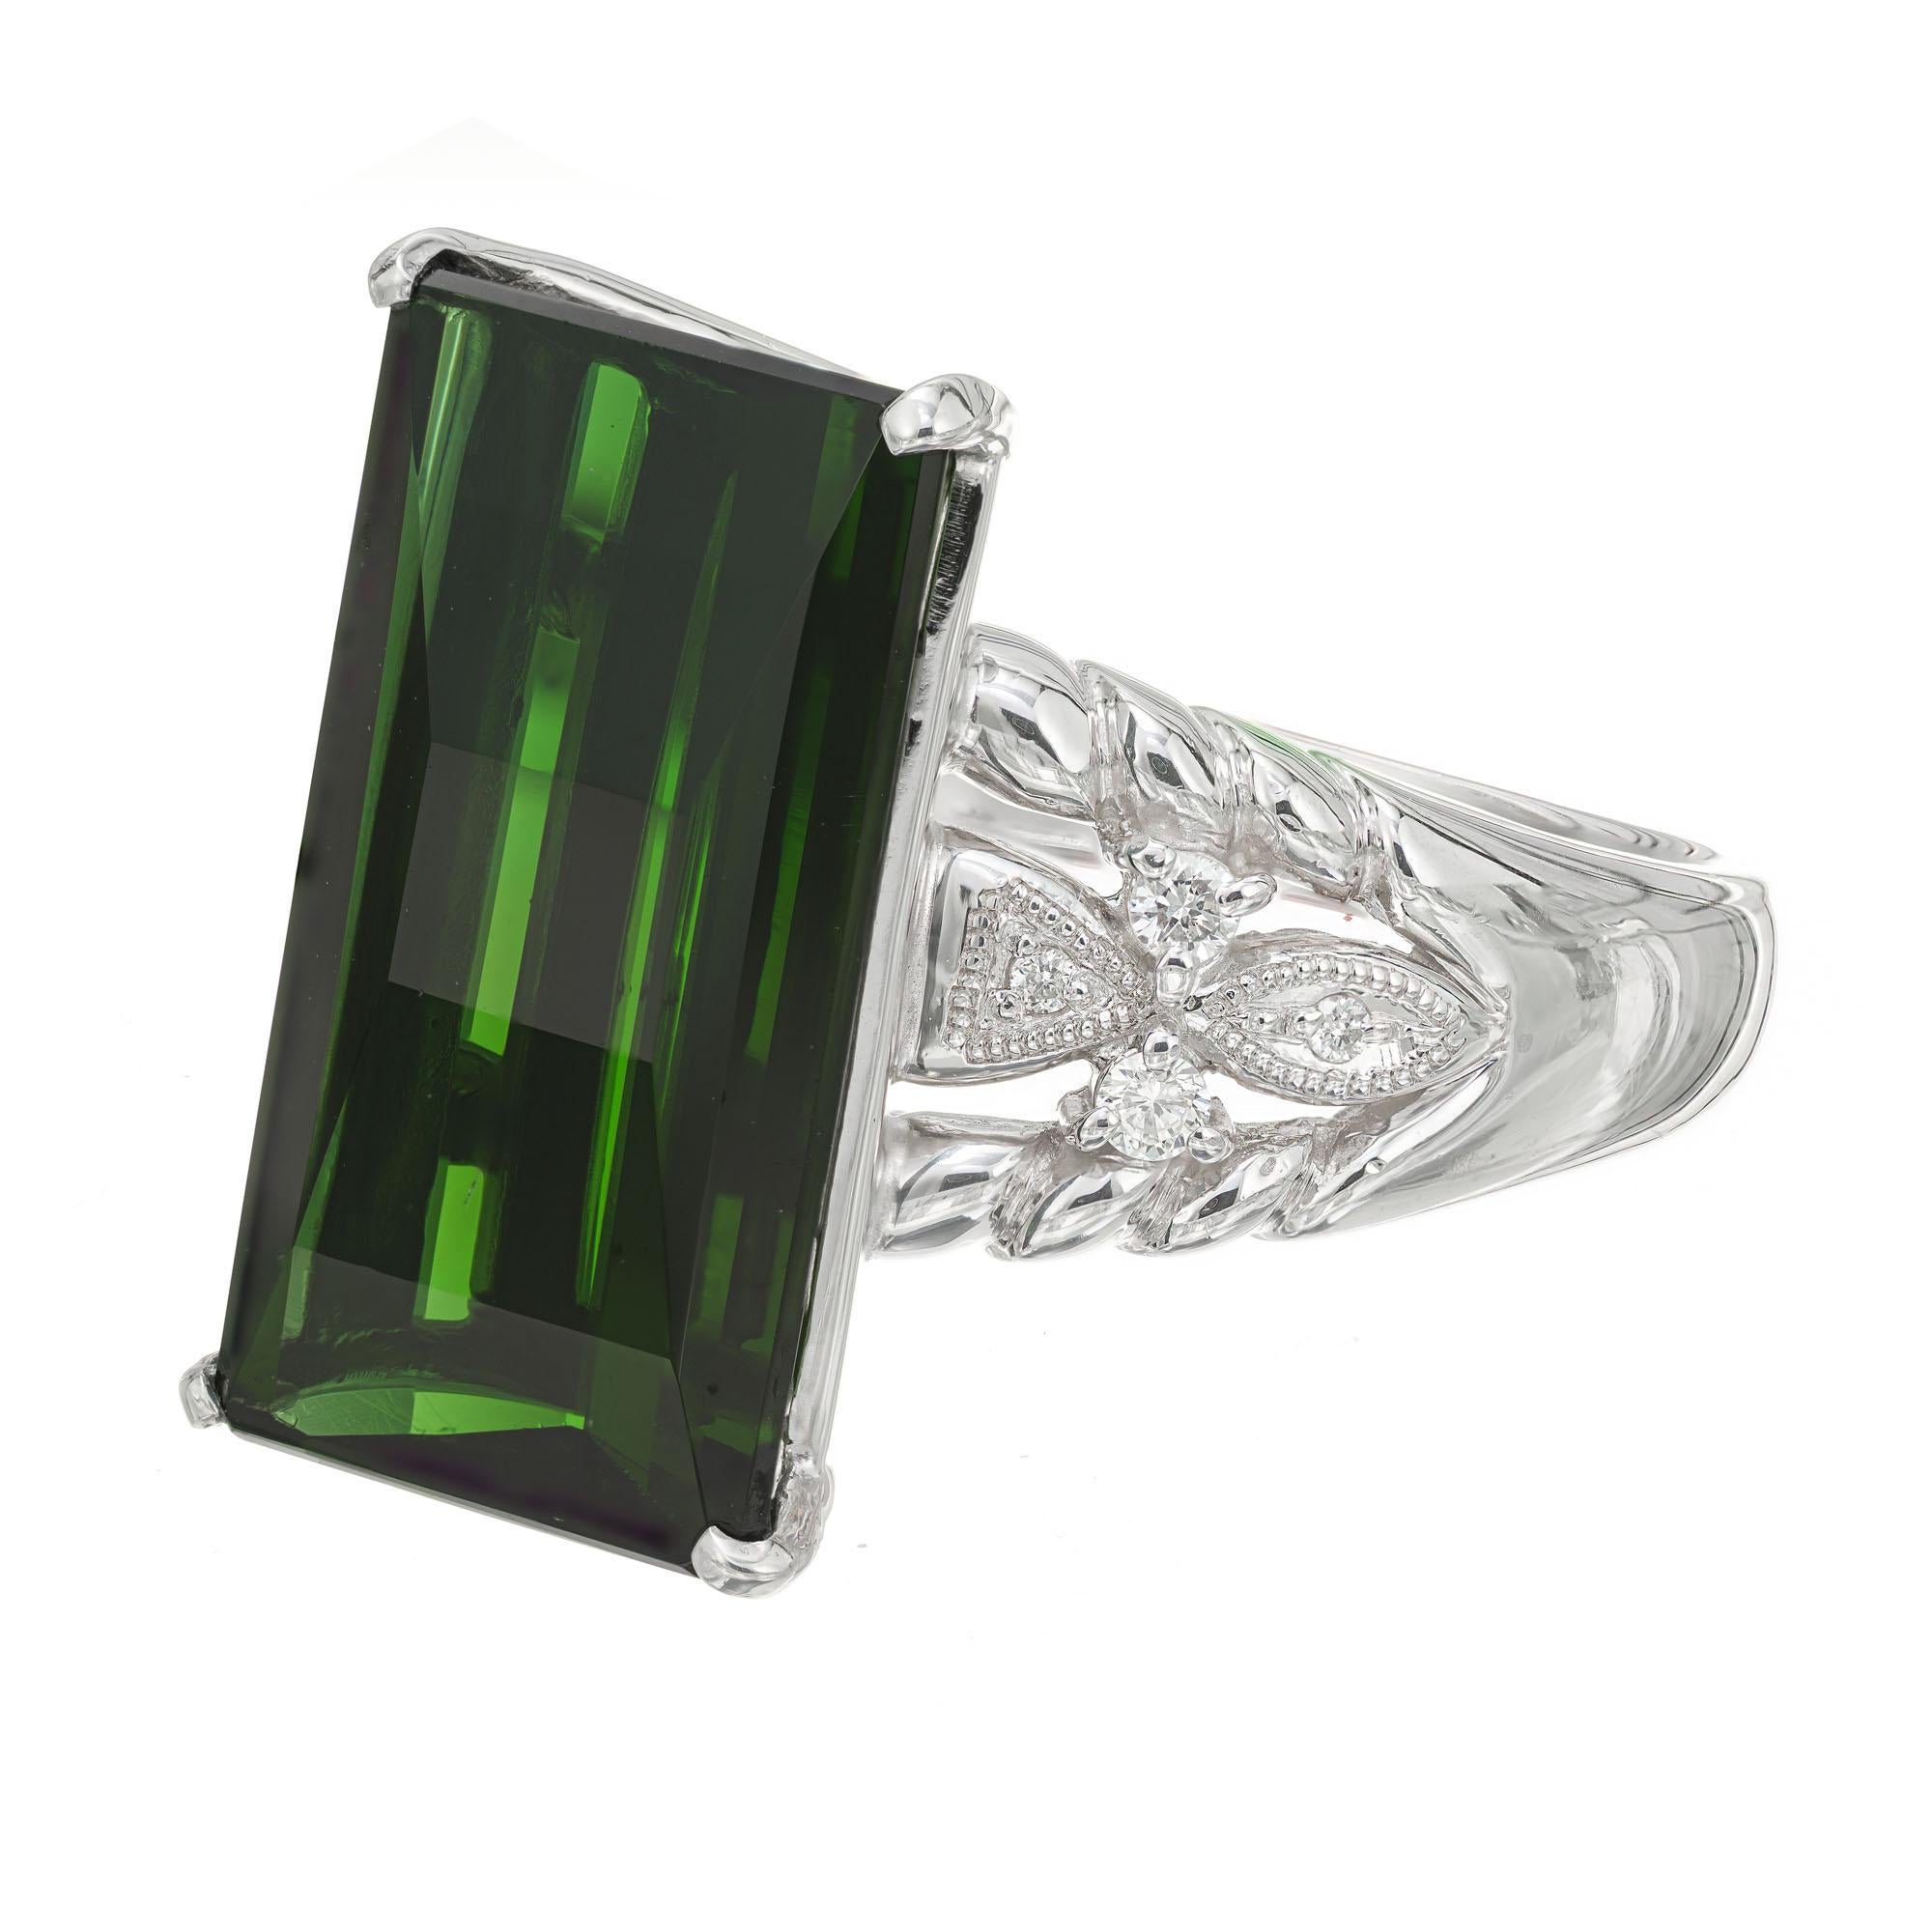 Tourmaline and diamond cocktail ring. Natural green rectangular 10.85 carat custom cut tourmaline in a solid platinum custom made setting with 8 round cut accent diamonds.  

1 rectangular custom cut green tourmaline, VS approx. 10.85cts
8 round